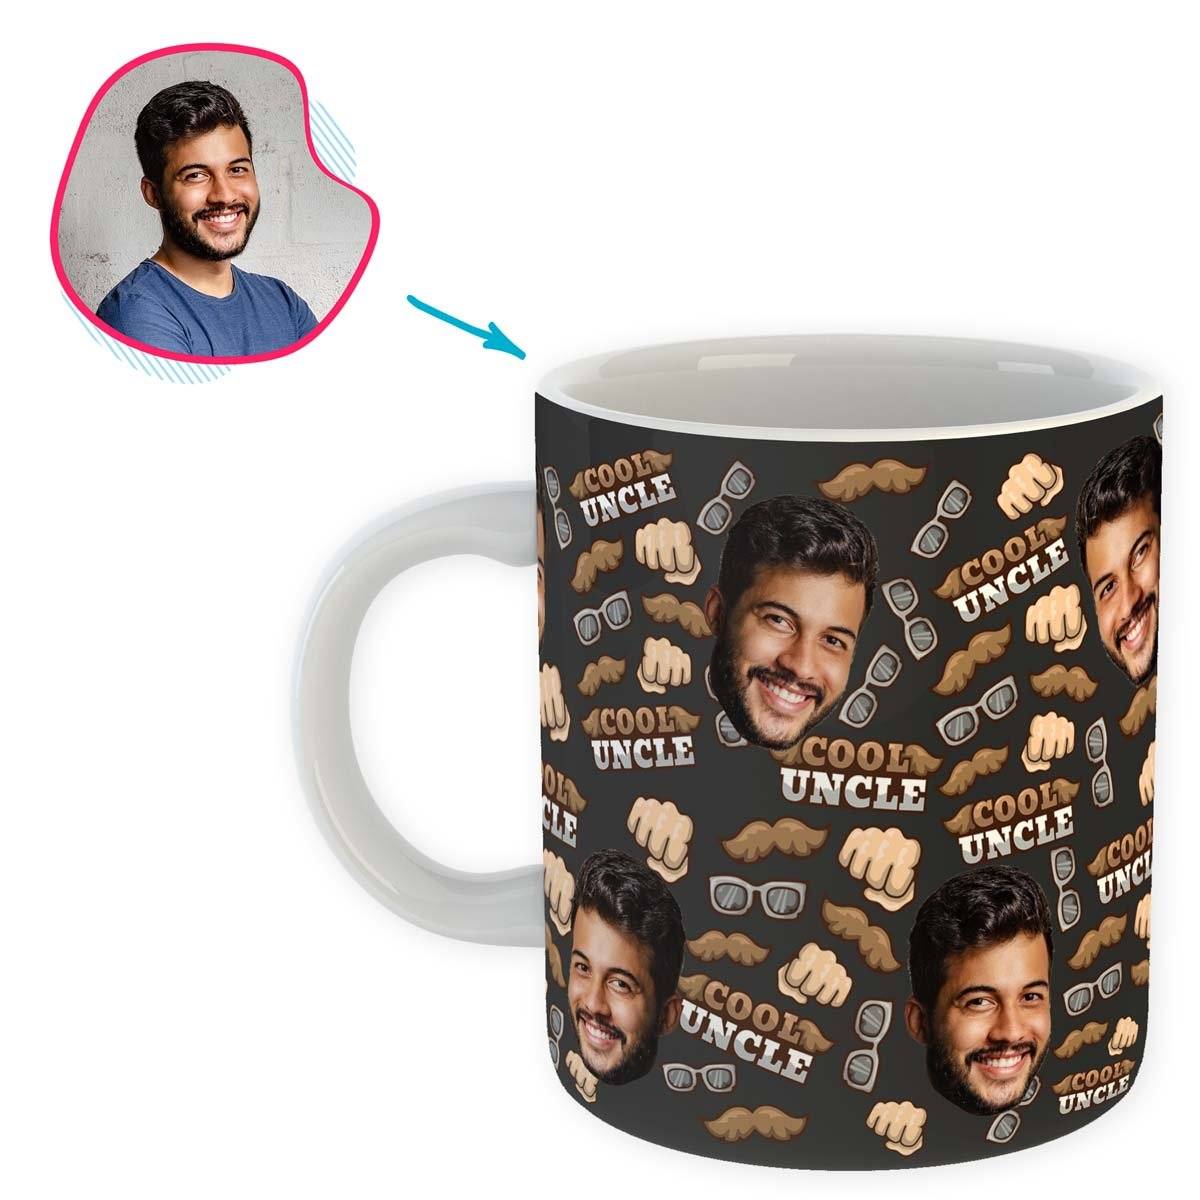 Dark Uncle personalized mug with photo of face printed on it